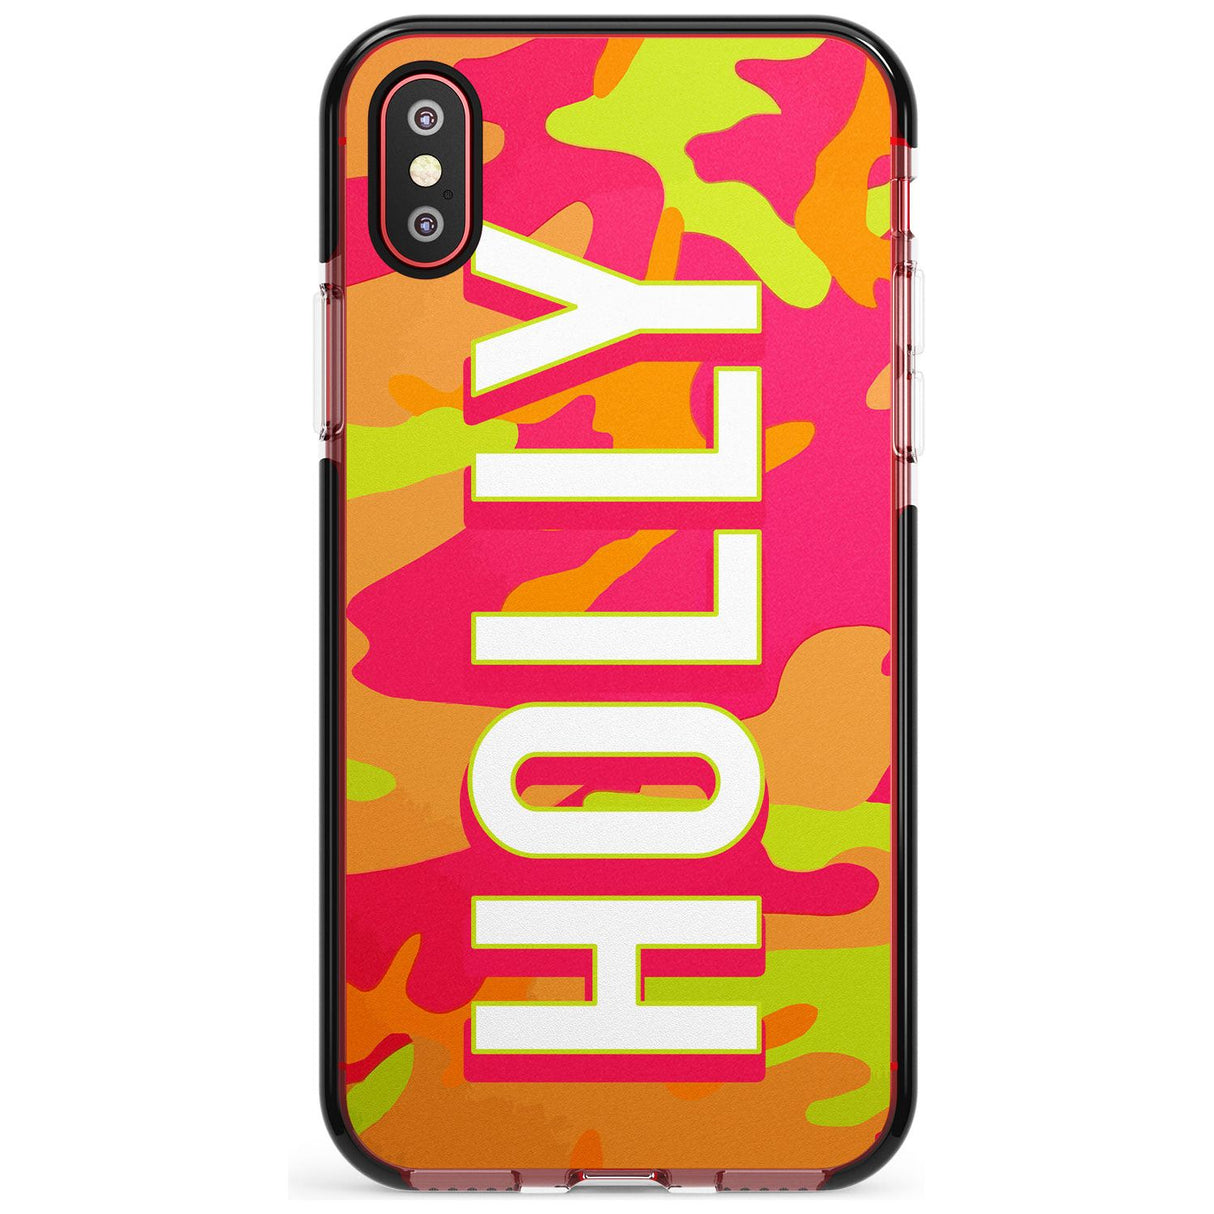 Colourful Neon Camo Pink Fade Impact Phone Case for iPhone X XS Max XR